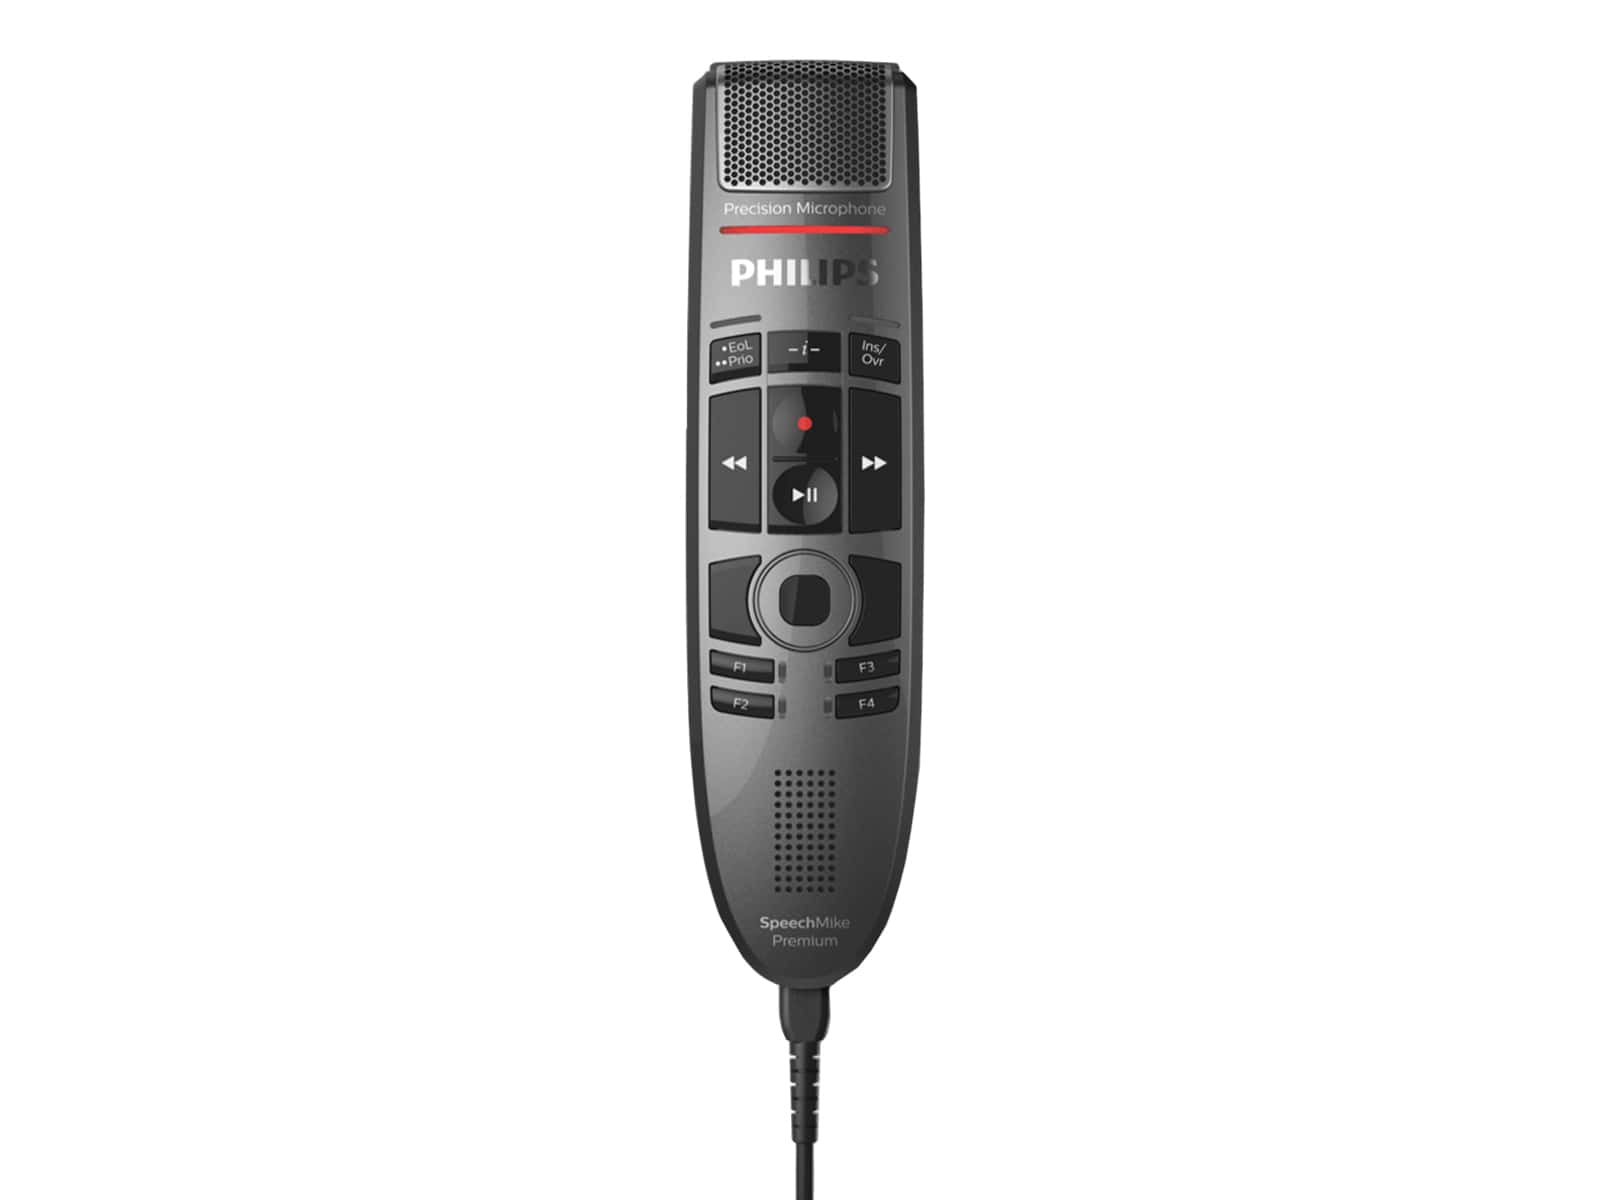 Philips SpeechMike Premium Touch Dictation Microphone Bar-code Scanner (SMP3800) Monitors.com 